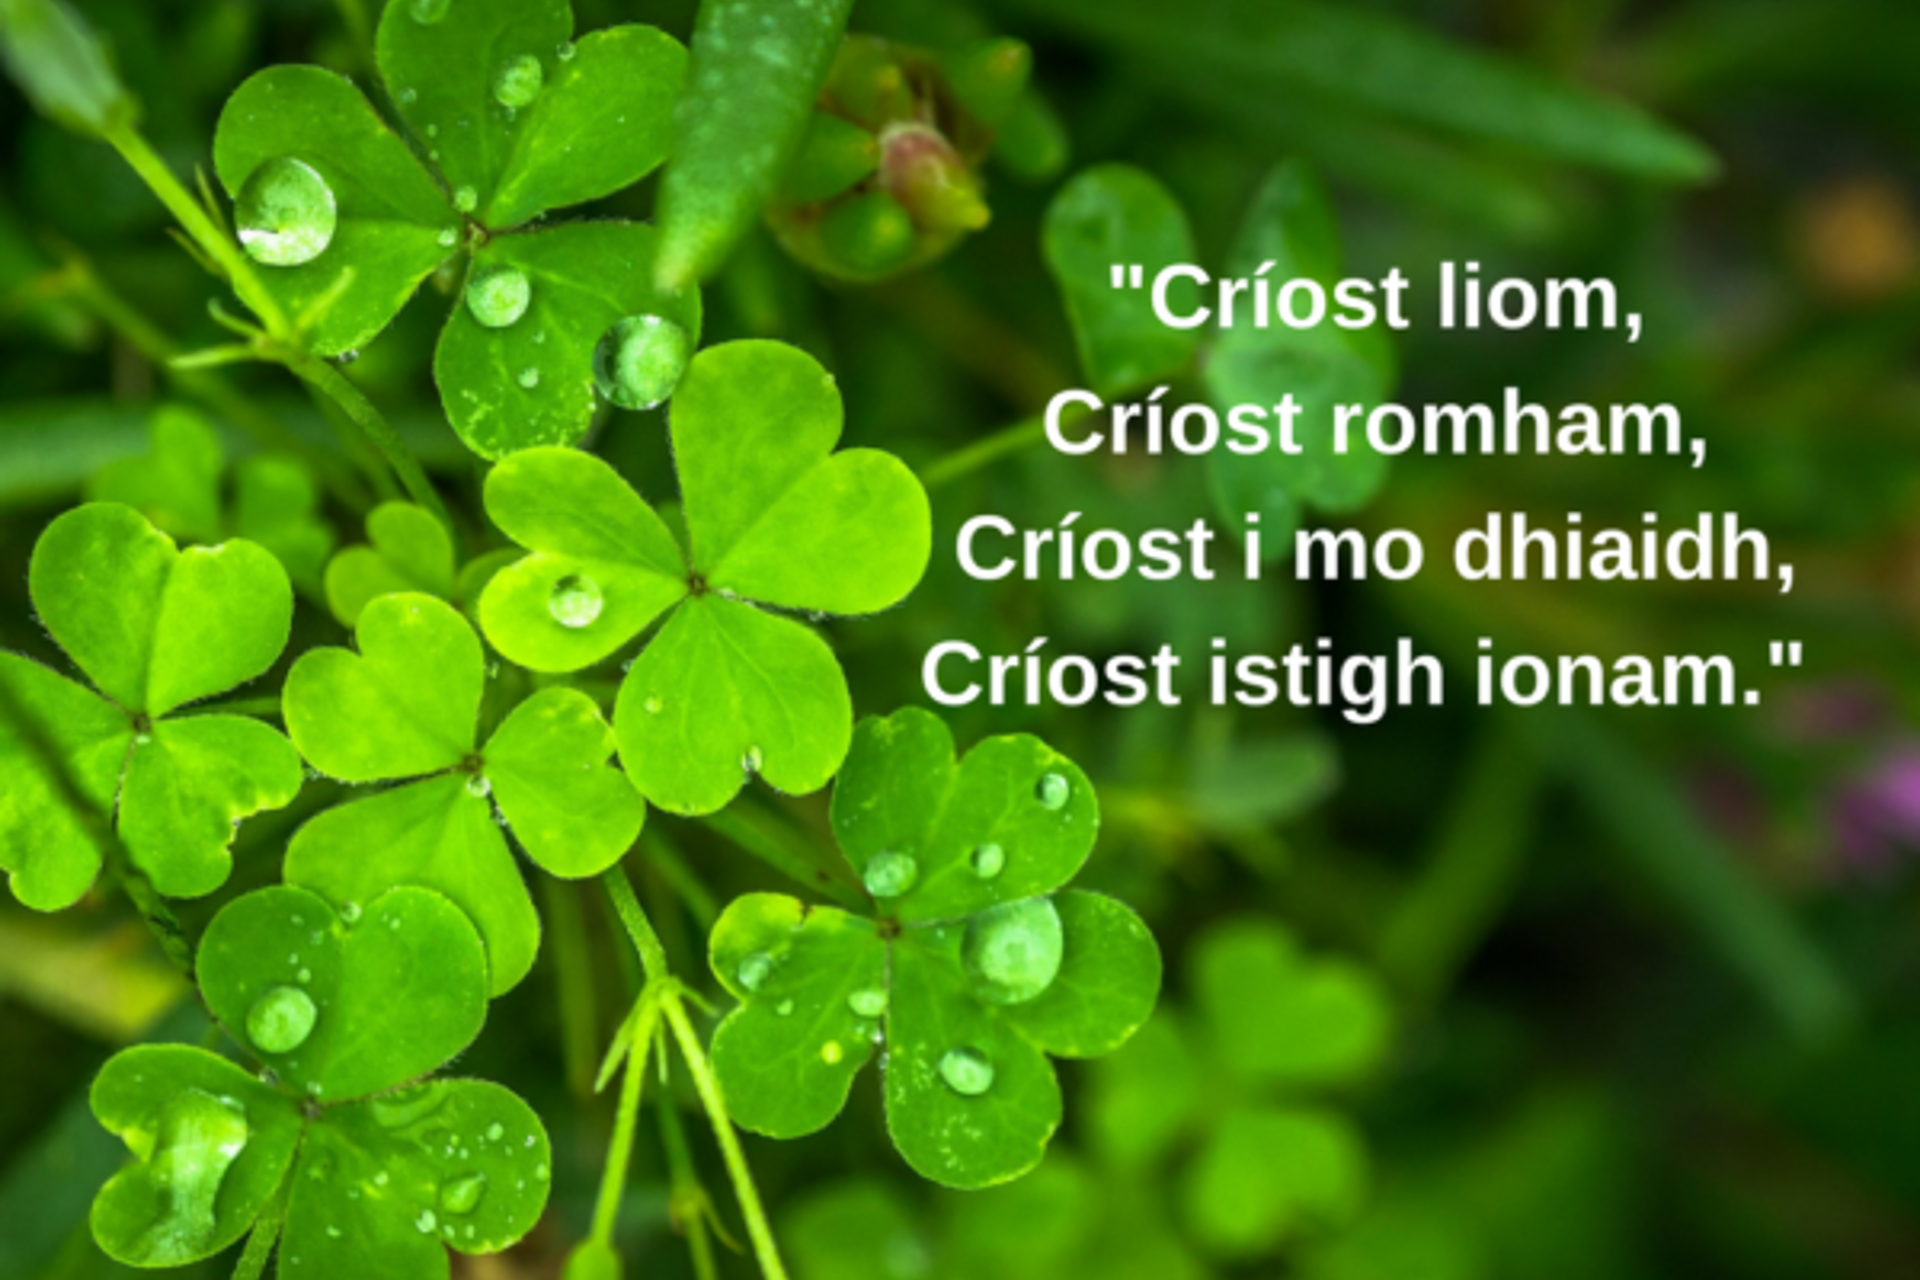 Resources for the Feast of Saint Patrick